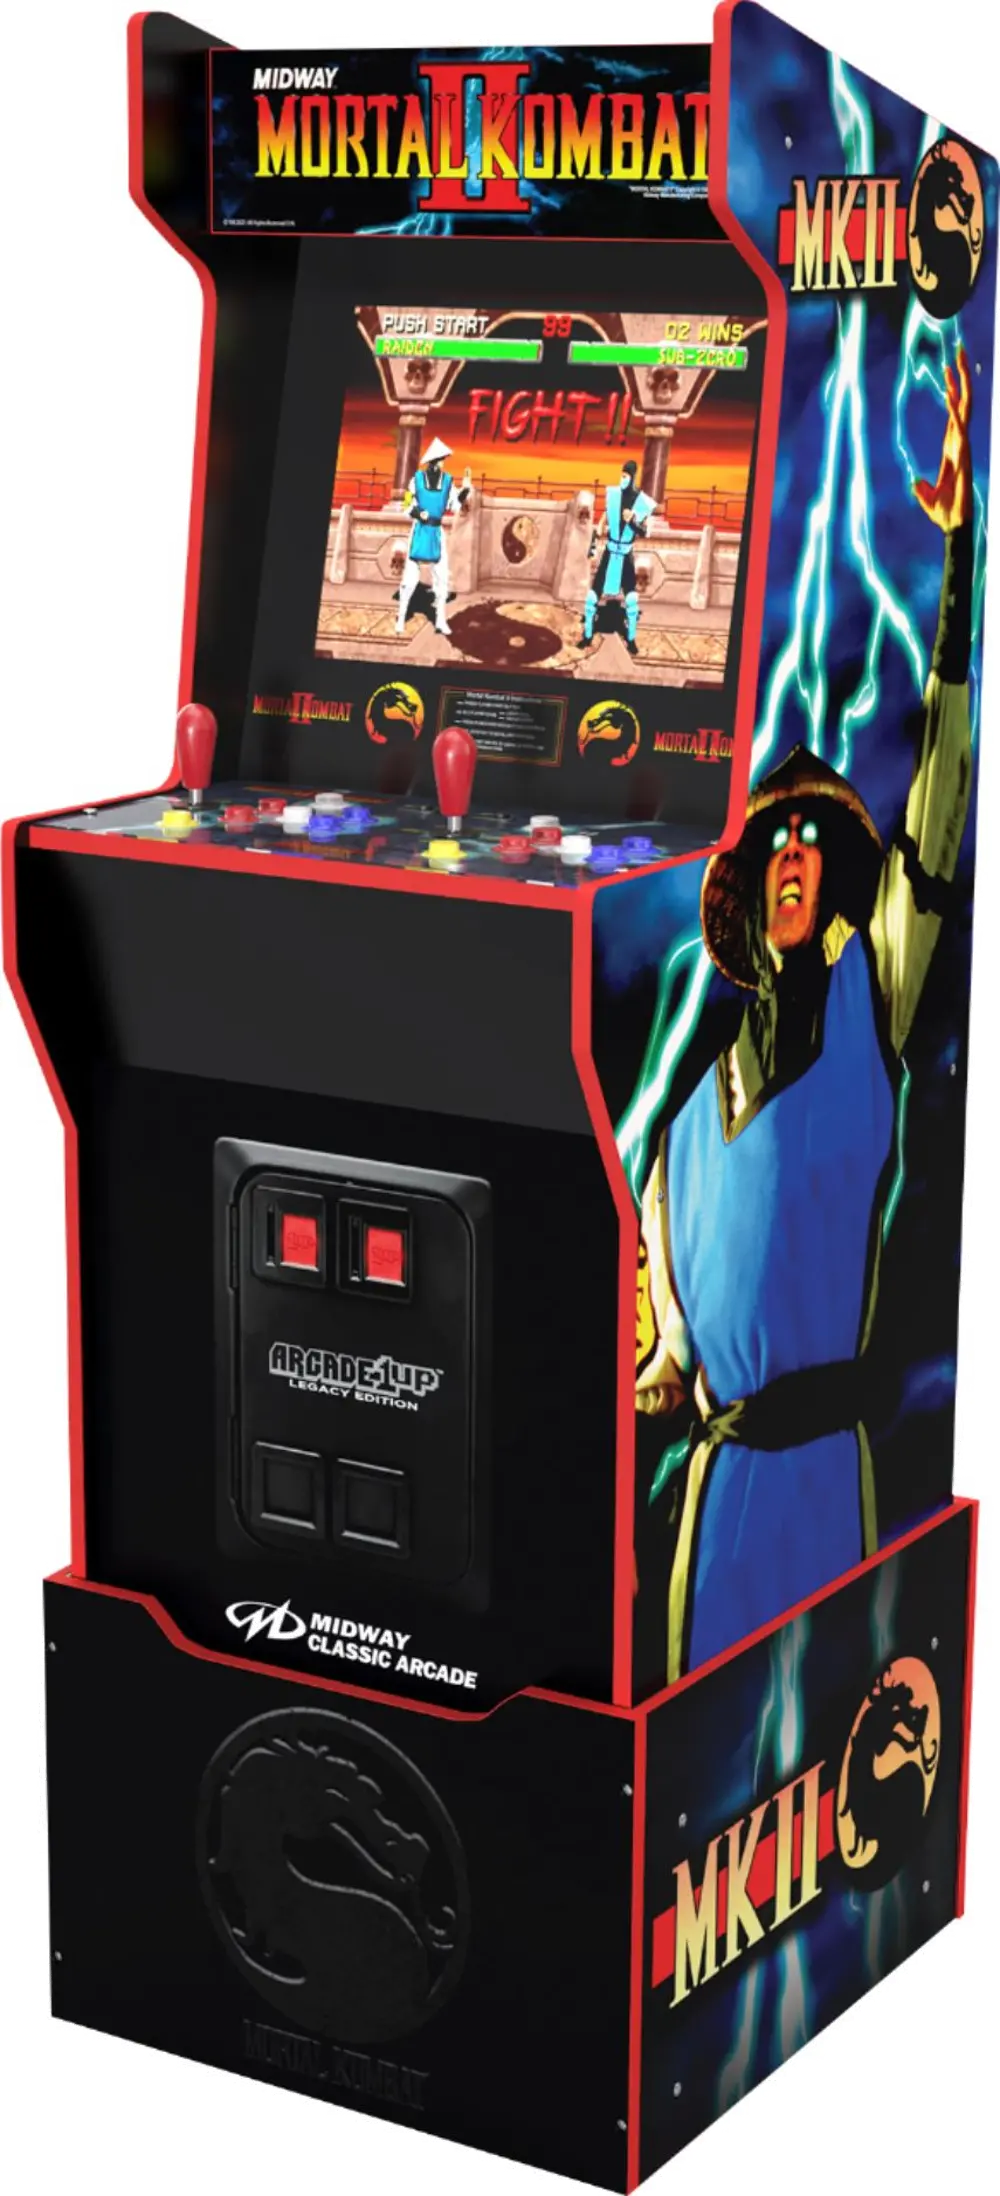 ARCADE1UP/MIDWAY Arcade 1Up Midway Legacy Edition Arcade Cabinet-1